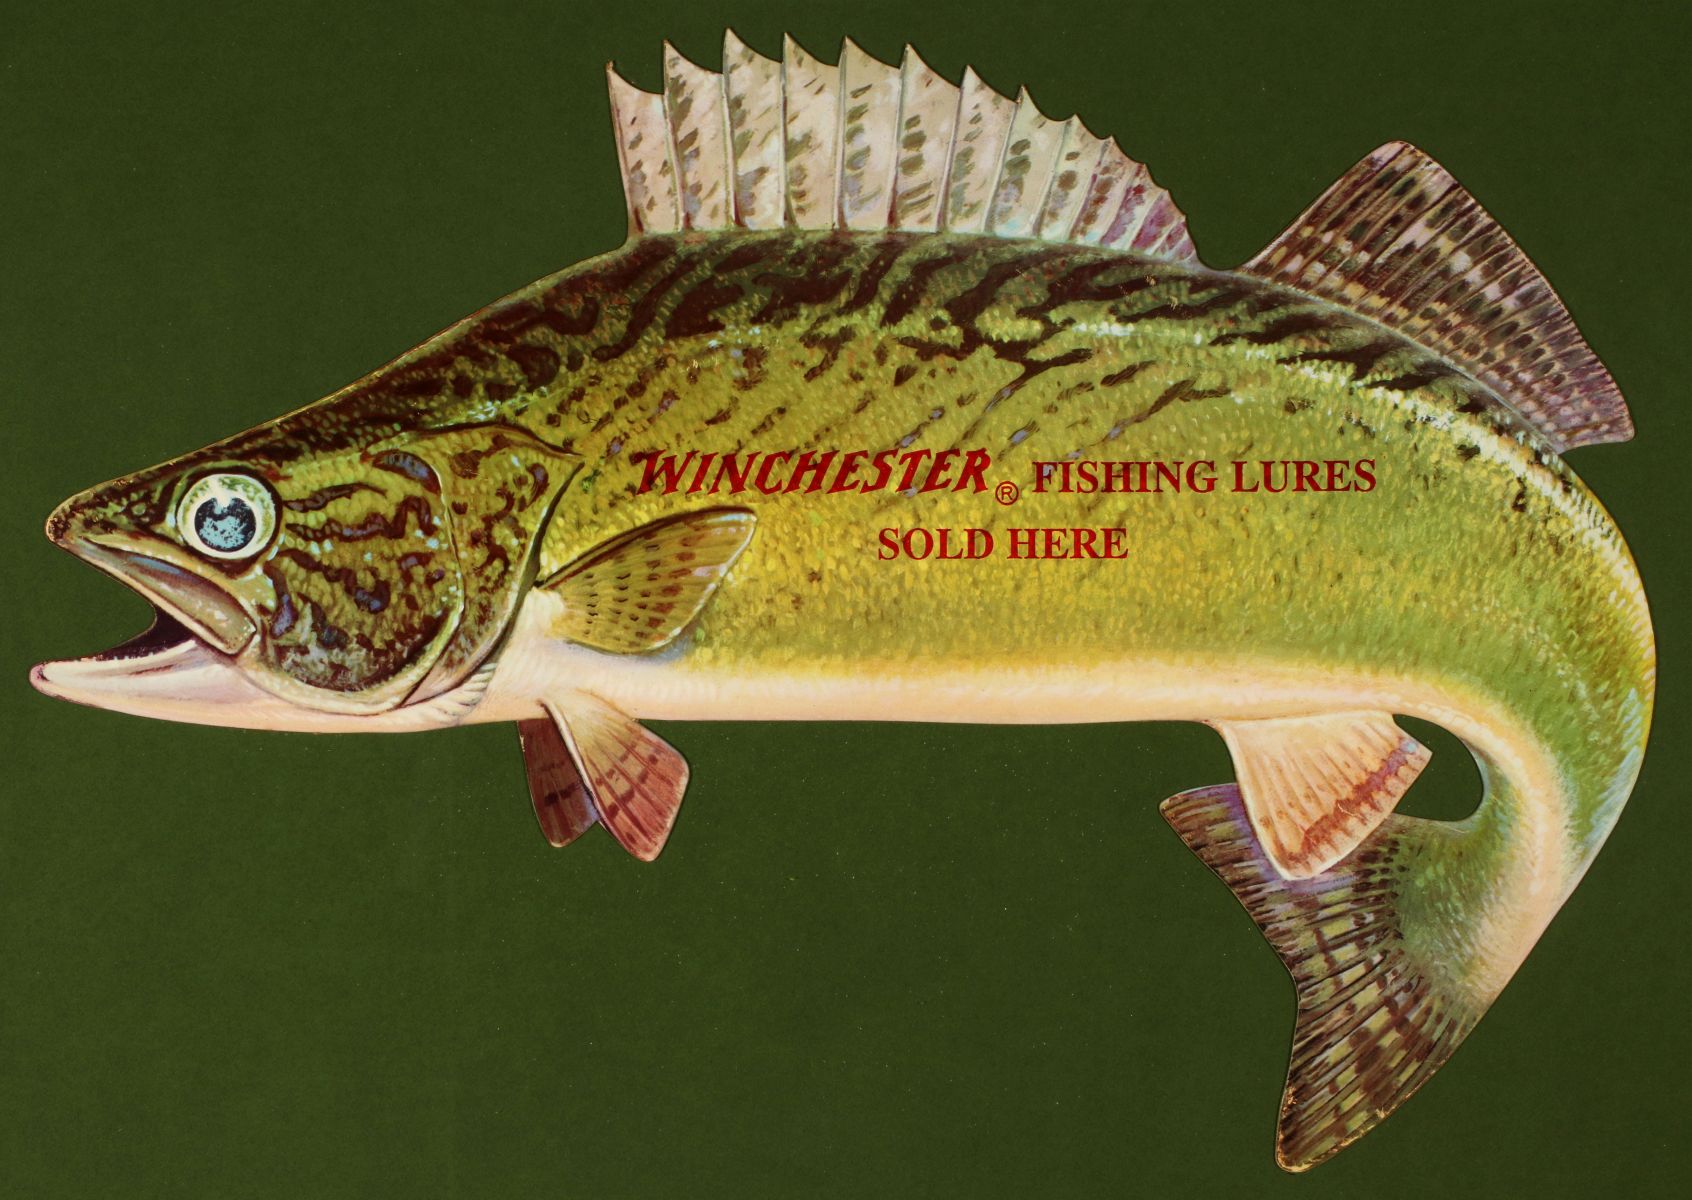 A NEW OLD STOCK WINCHESTER FISHING LURES DIE-CUT SIGN